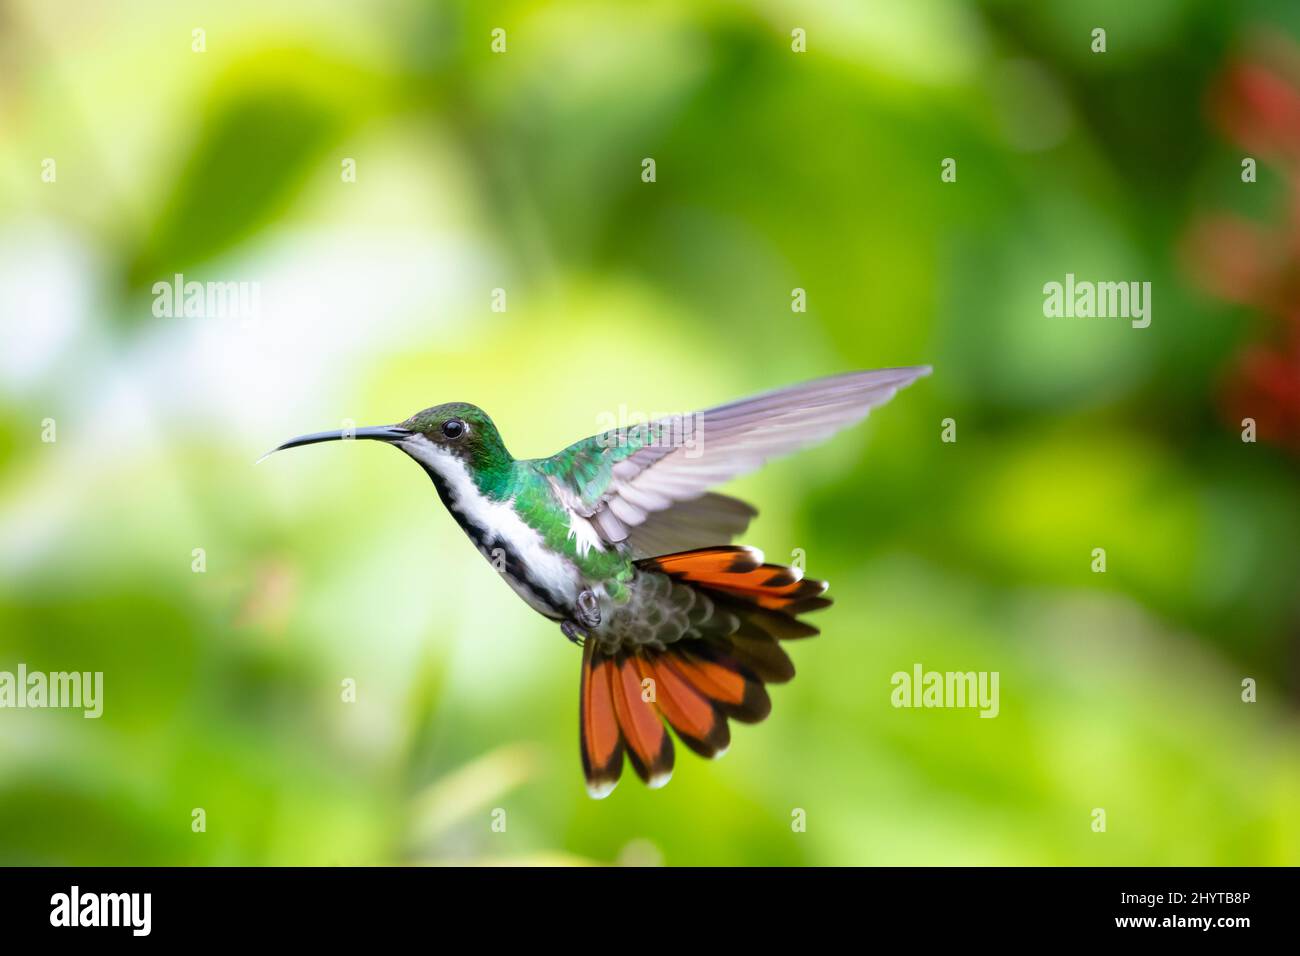 Female Black-throated Mango hummingbird, Anthracothorax nigricollis, in a unique pose hovering with her orange tail flared and wings spread. Stock Photo